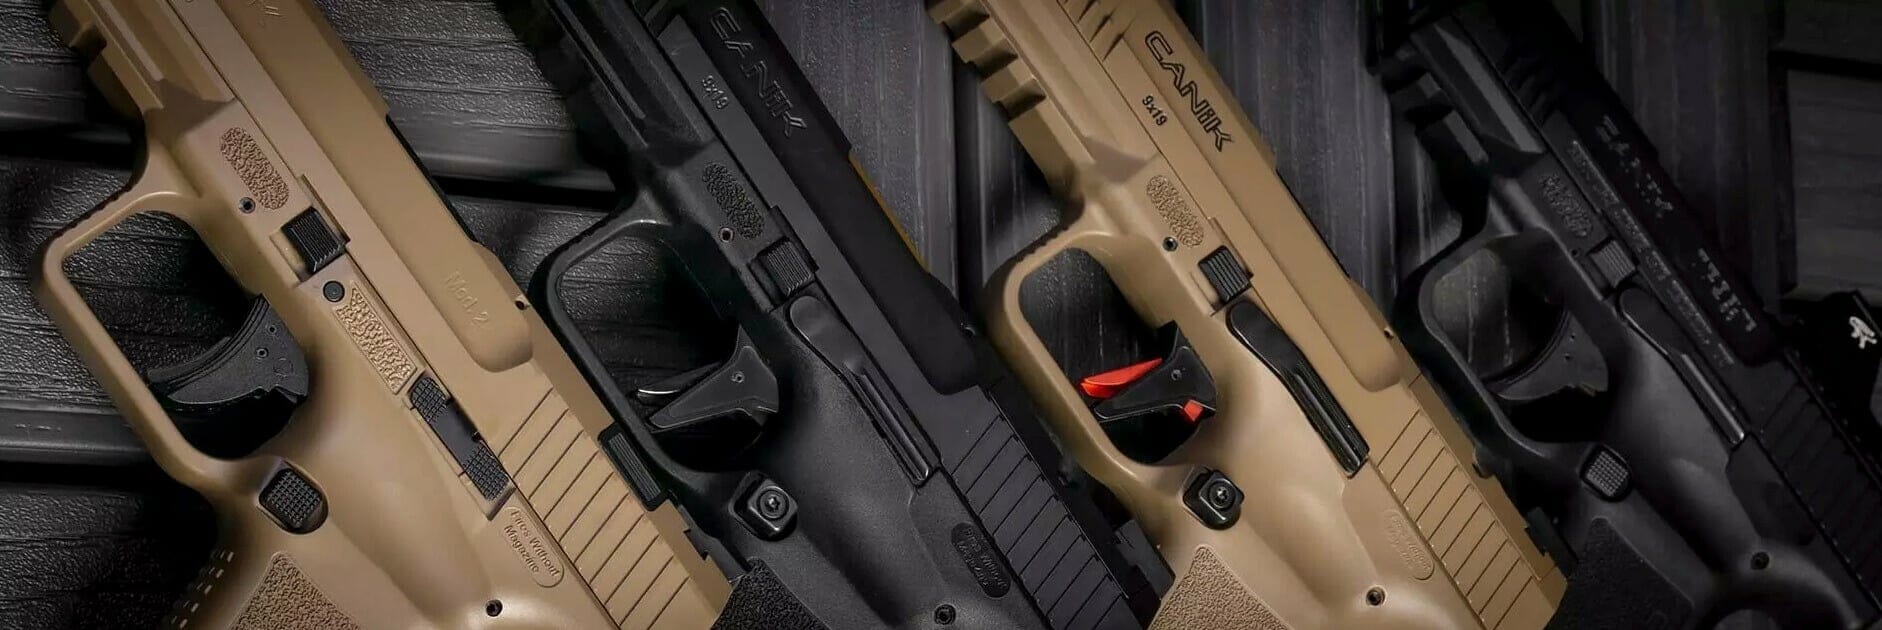 Canik Firearms – About the Brand, Its Top Handguns, & More